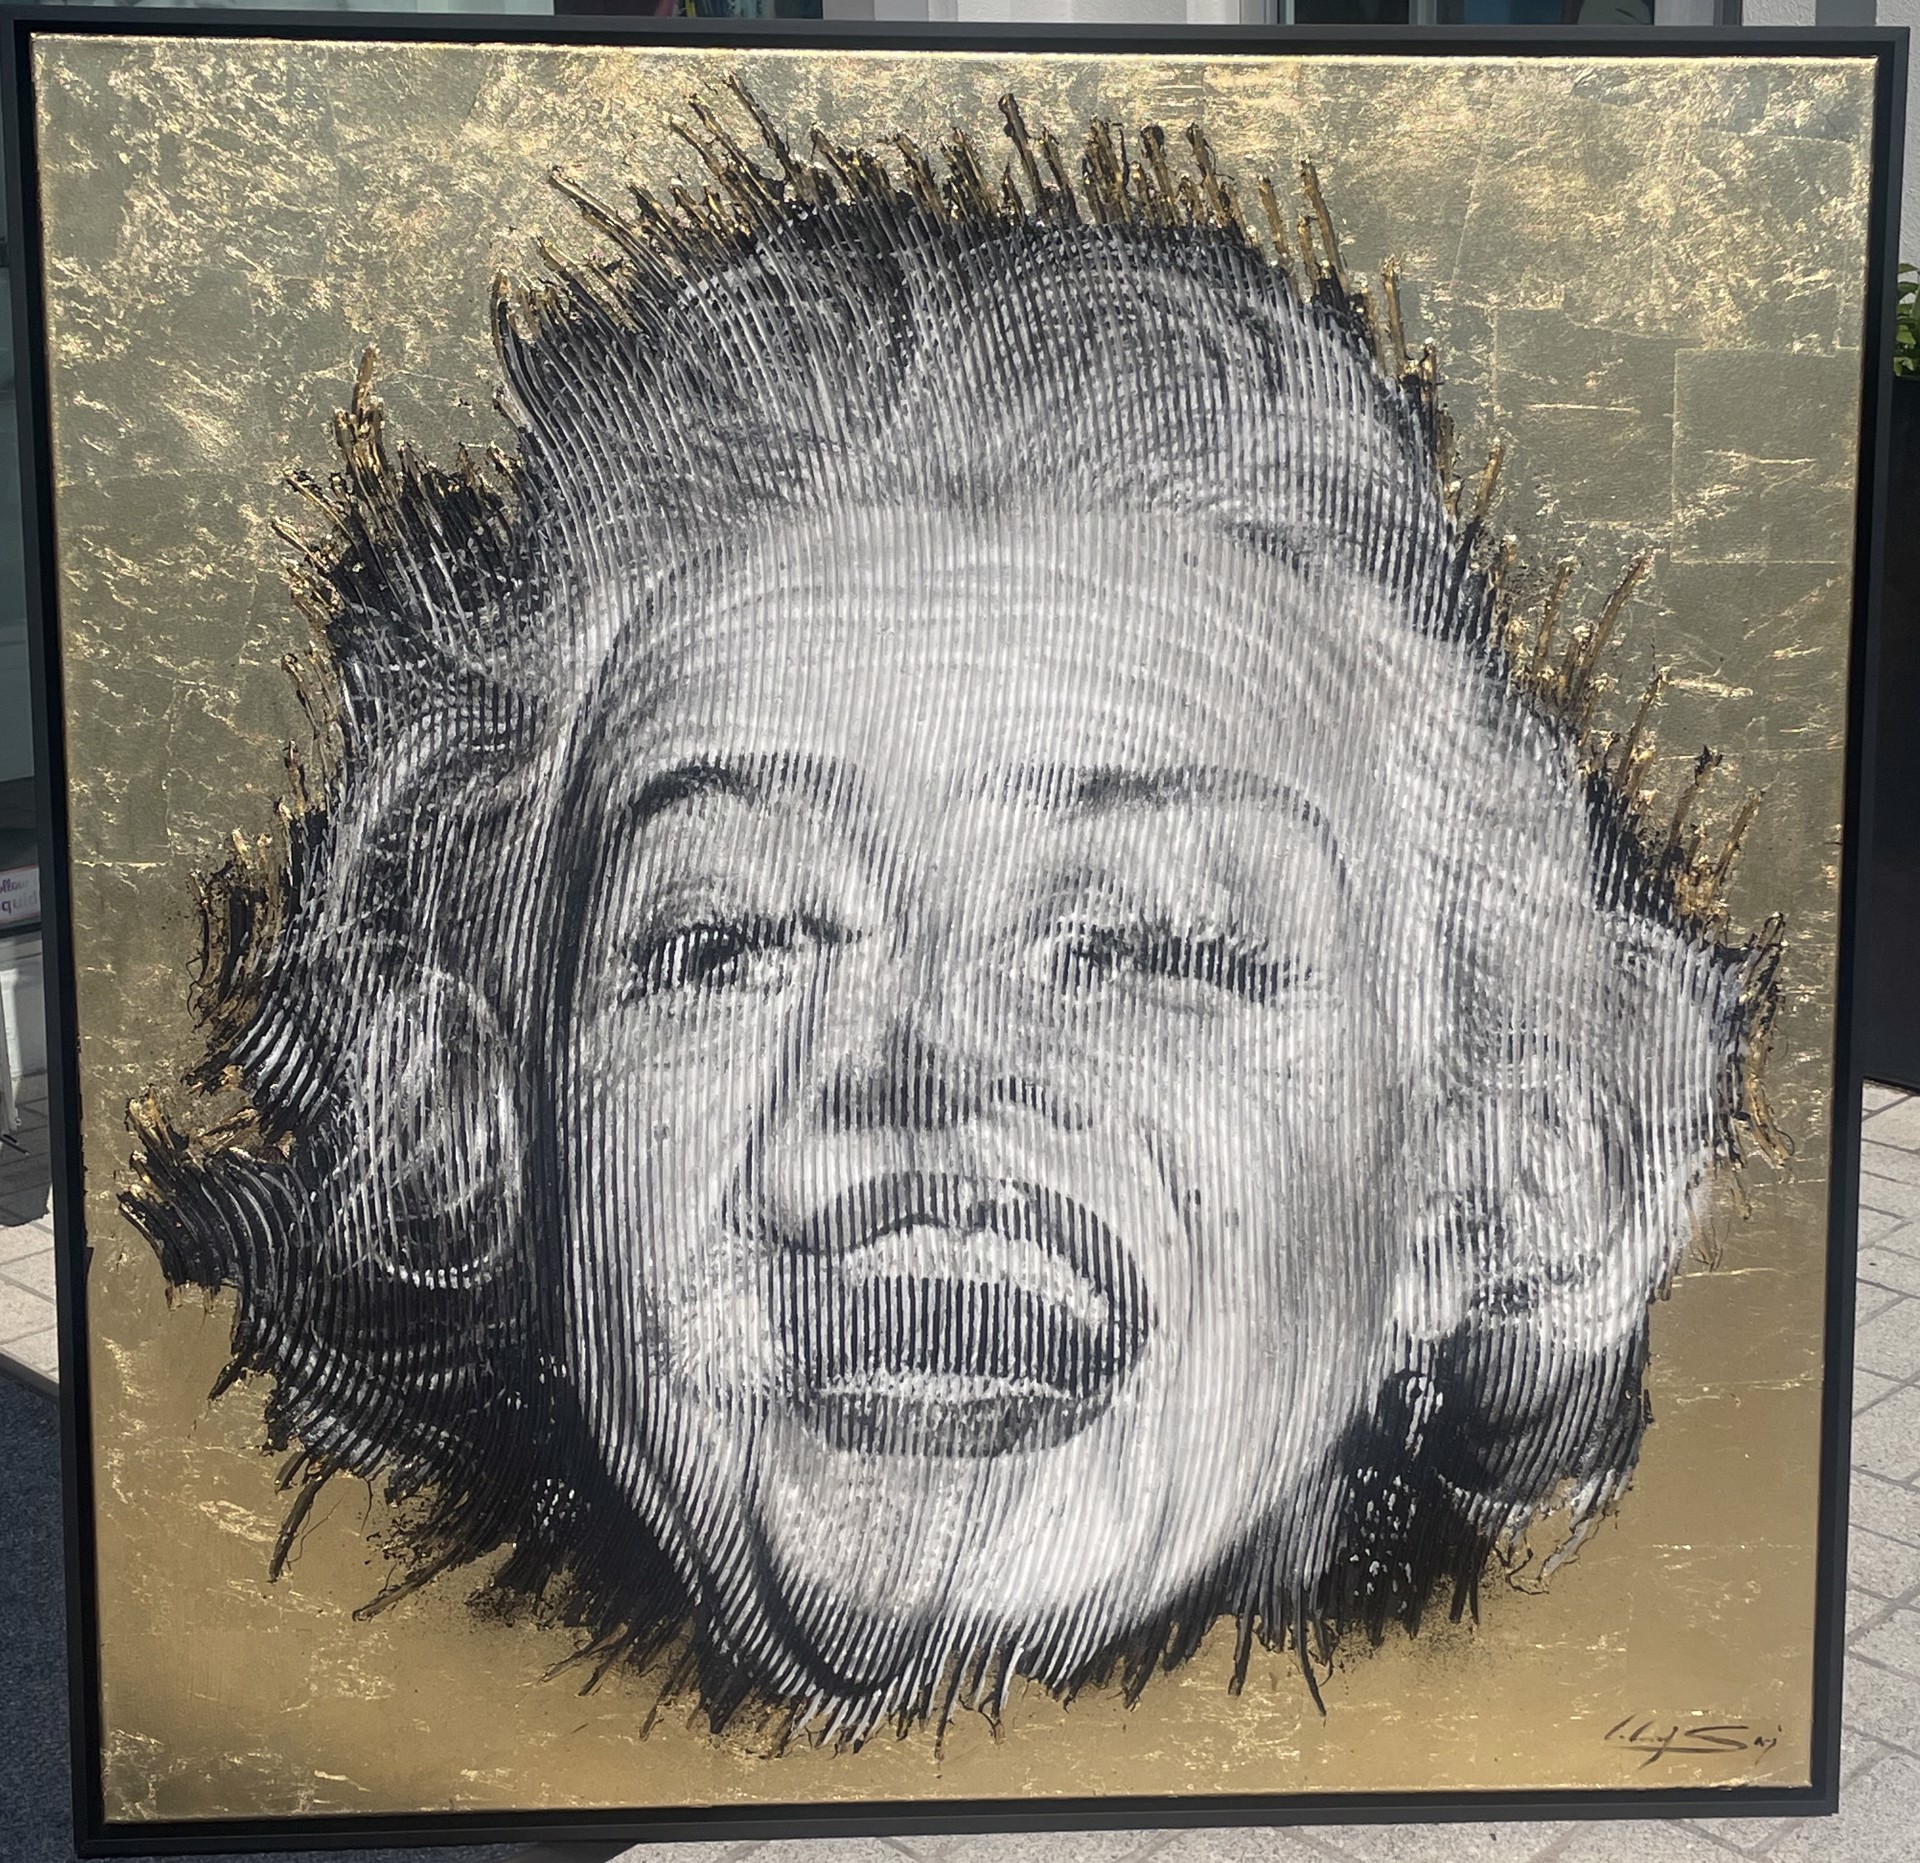 Beauty AND Brains - Gold [SOLD] by Sergi Cadenas